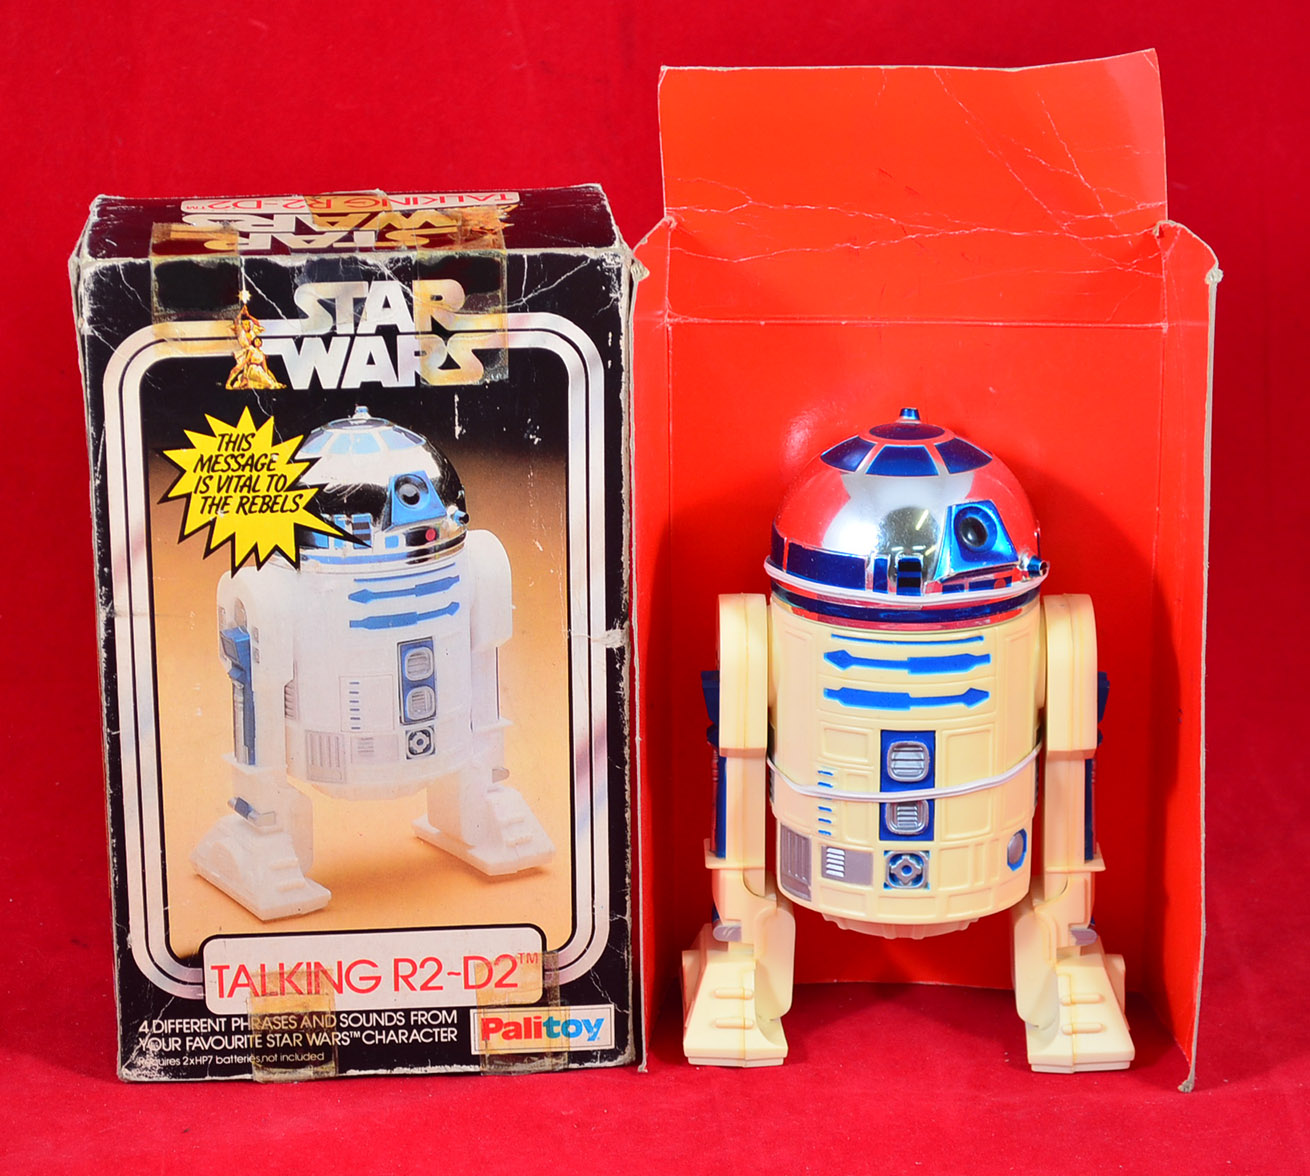 Palitoy Star Wars Talking R2-D2. VG in G box (lots of scuffs and creases).